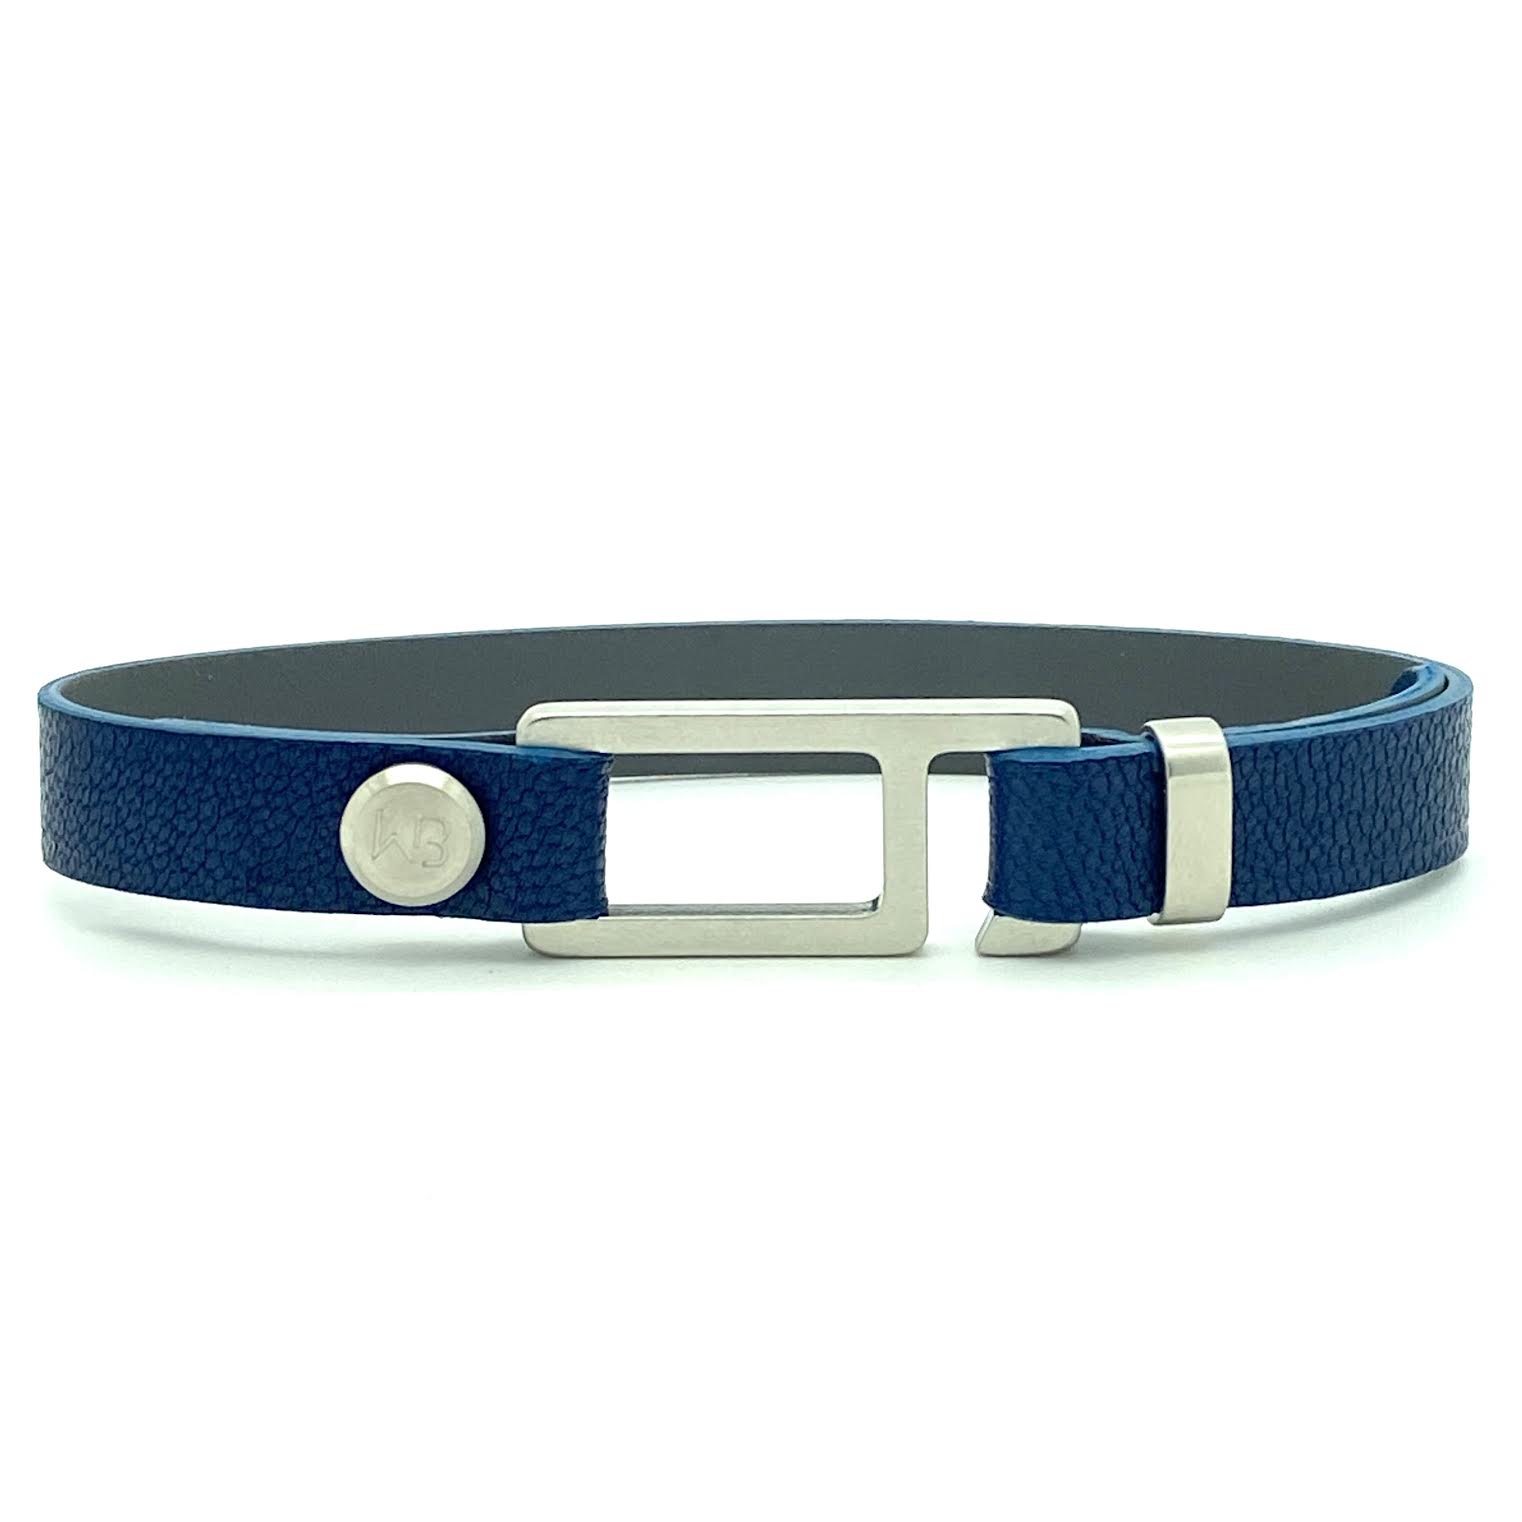 Our striking blue/gray Italian leather bracelet is paired perfectly with our artisan designed, lightly brushed hardware. Your hardware choices include Rose Gold, Yellow Gold, Stainless Steel or Black Ceramic. This adjustable size bracelet is a distinctive piece worn alone or with a WristBend stacking bracelet. Made by WristBend